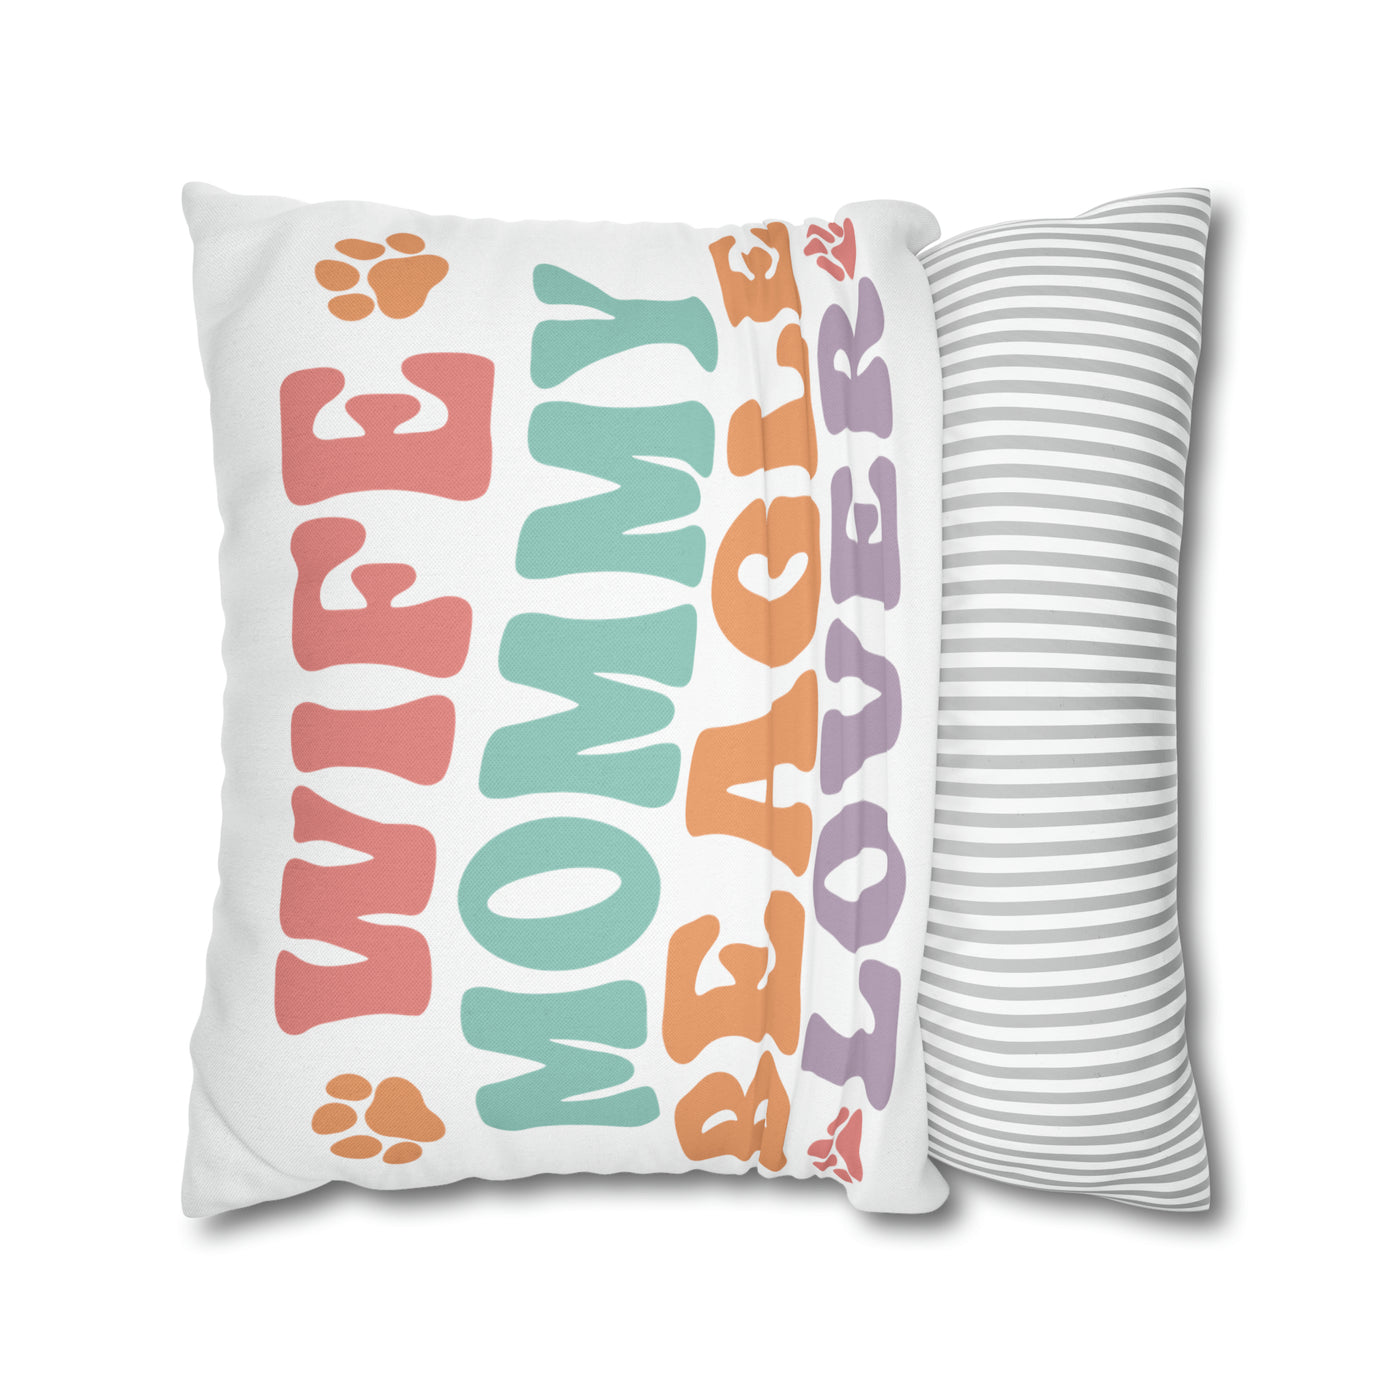 Wife Mommy Beagle Lover Square Pillow Case